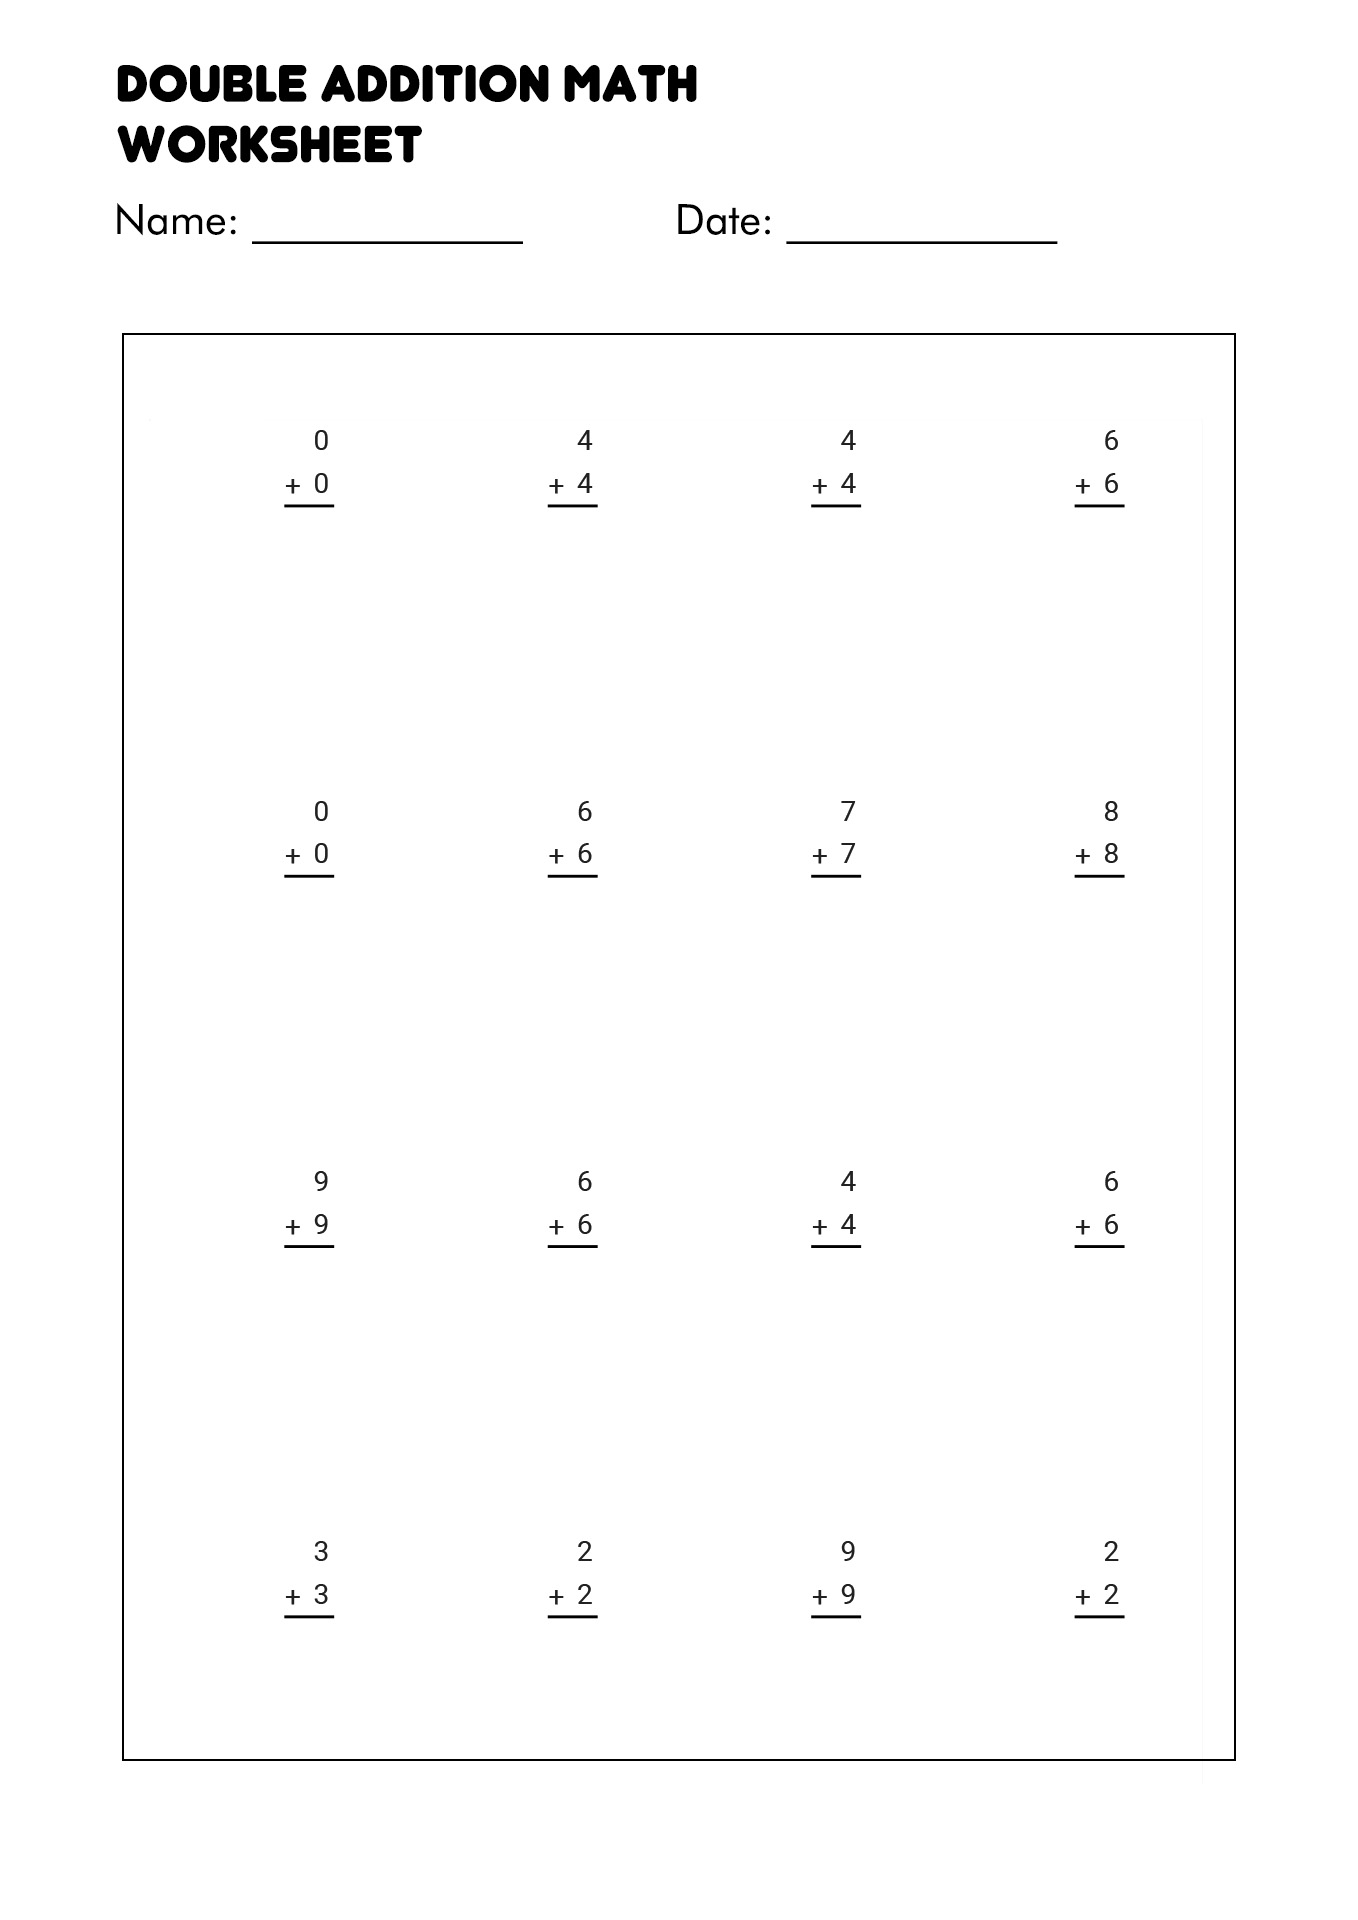 Double Addition Math Worksheets for 2nd Grade Image